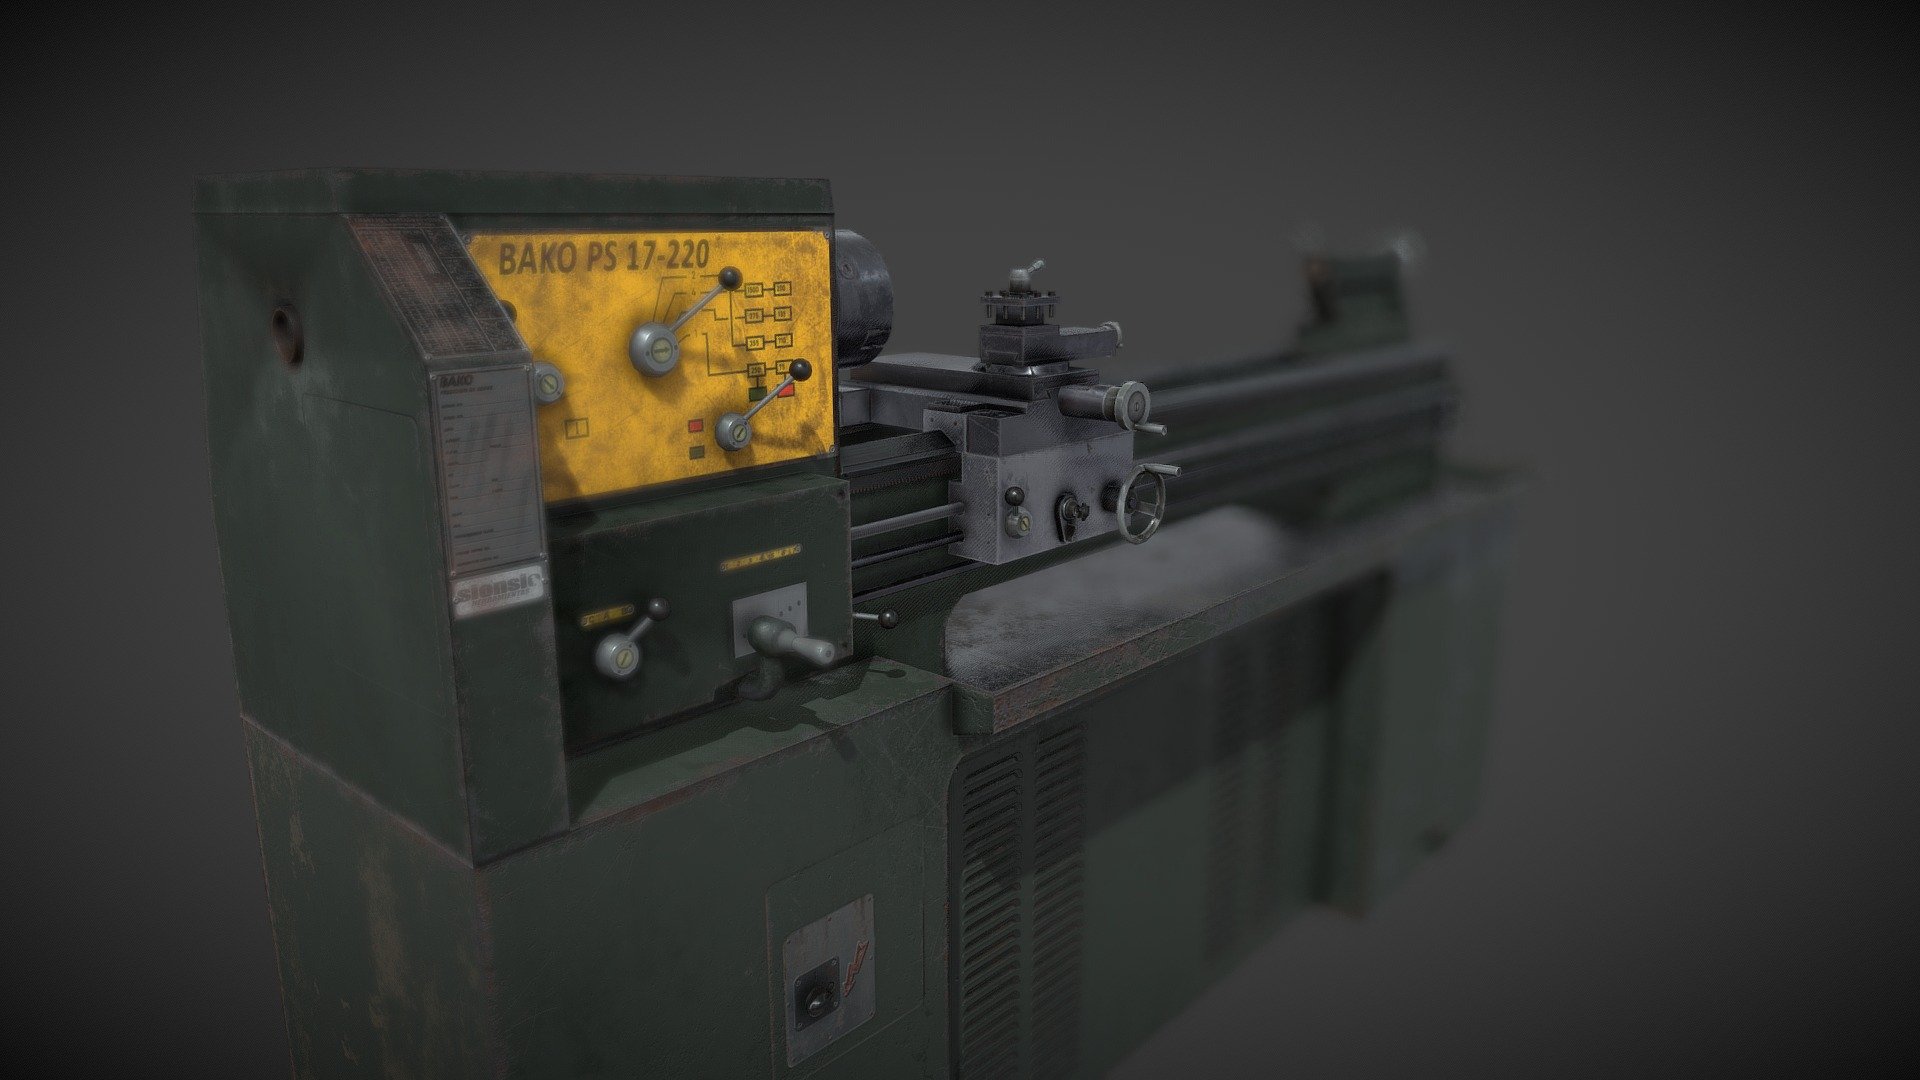 Old lathe game ready low poly model, modeled in blender, uv's in rizomUV, baked in marmoset and textured in substance painter and photoshop.
Has 17.483 triangles, 18.881 vertices.
4 materials of 4K, texture set: normal, base color, roughness, metallic &amp; AO 3d model